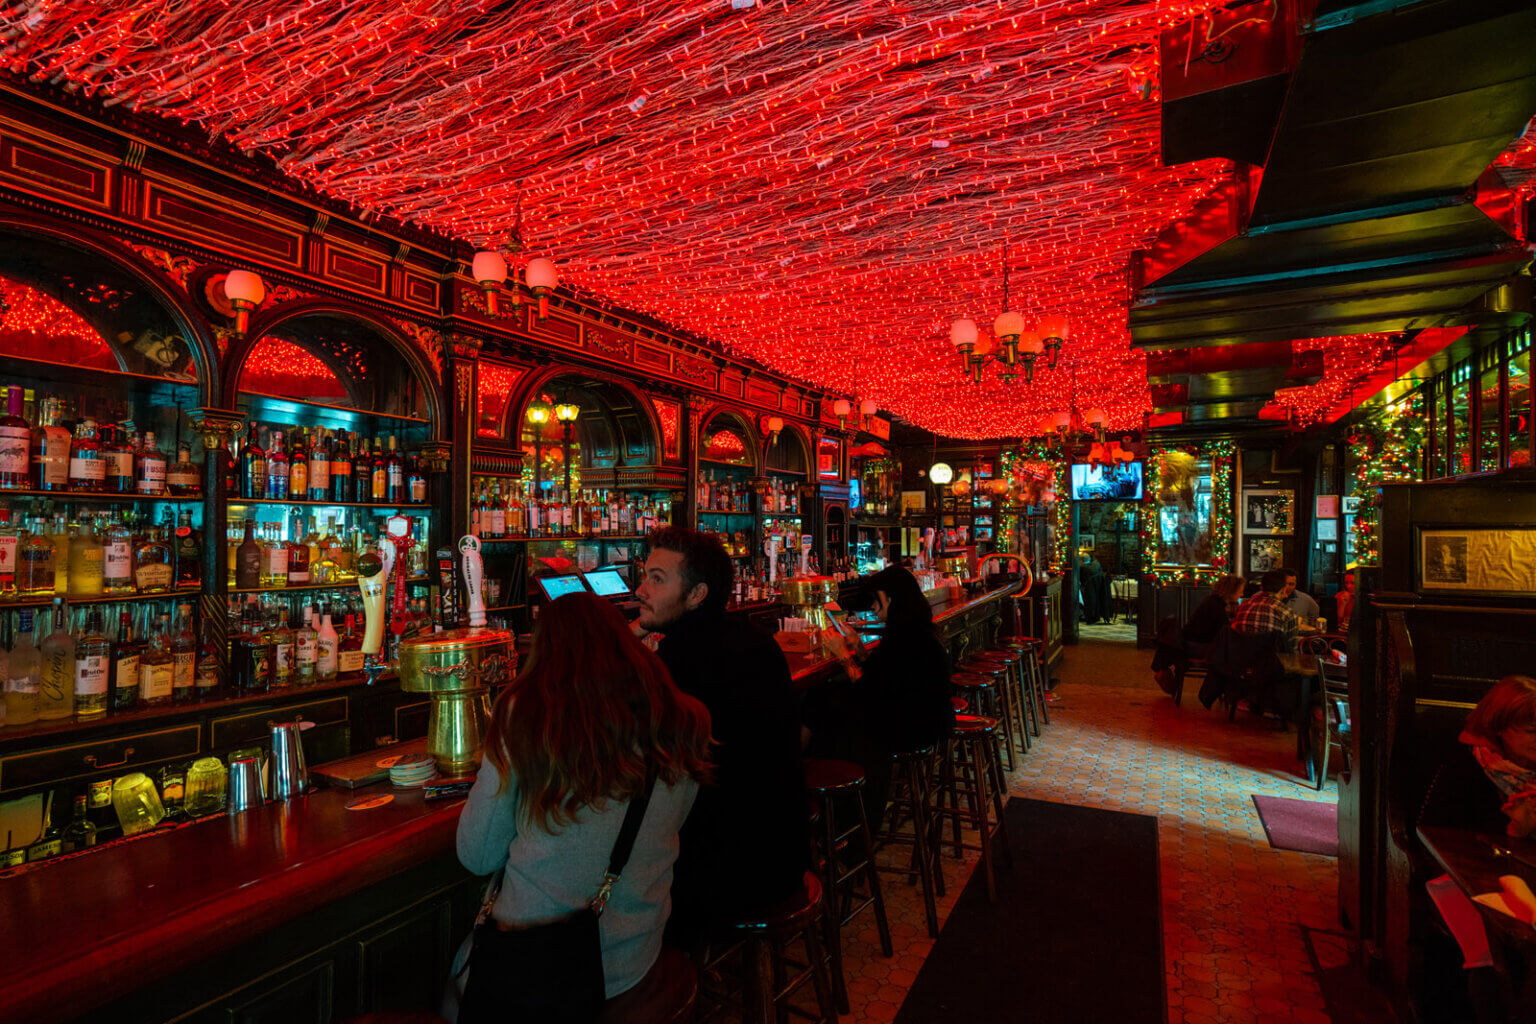 Interior of Petes Tavern in NYC for Christmas